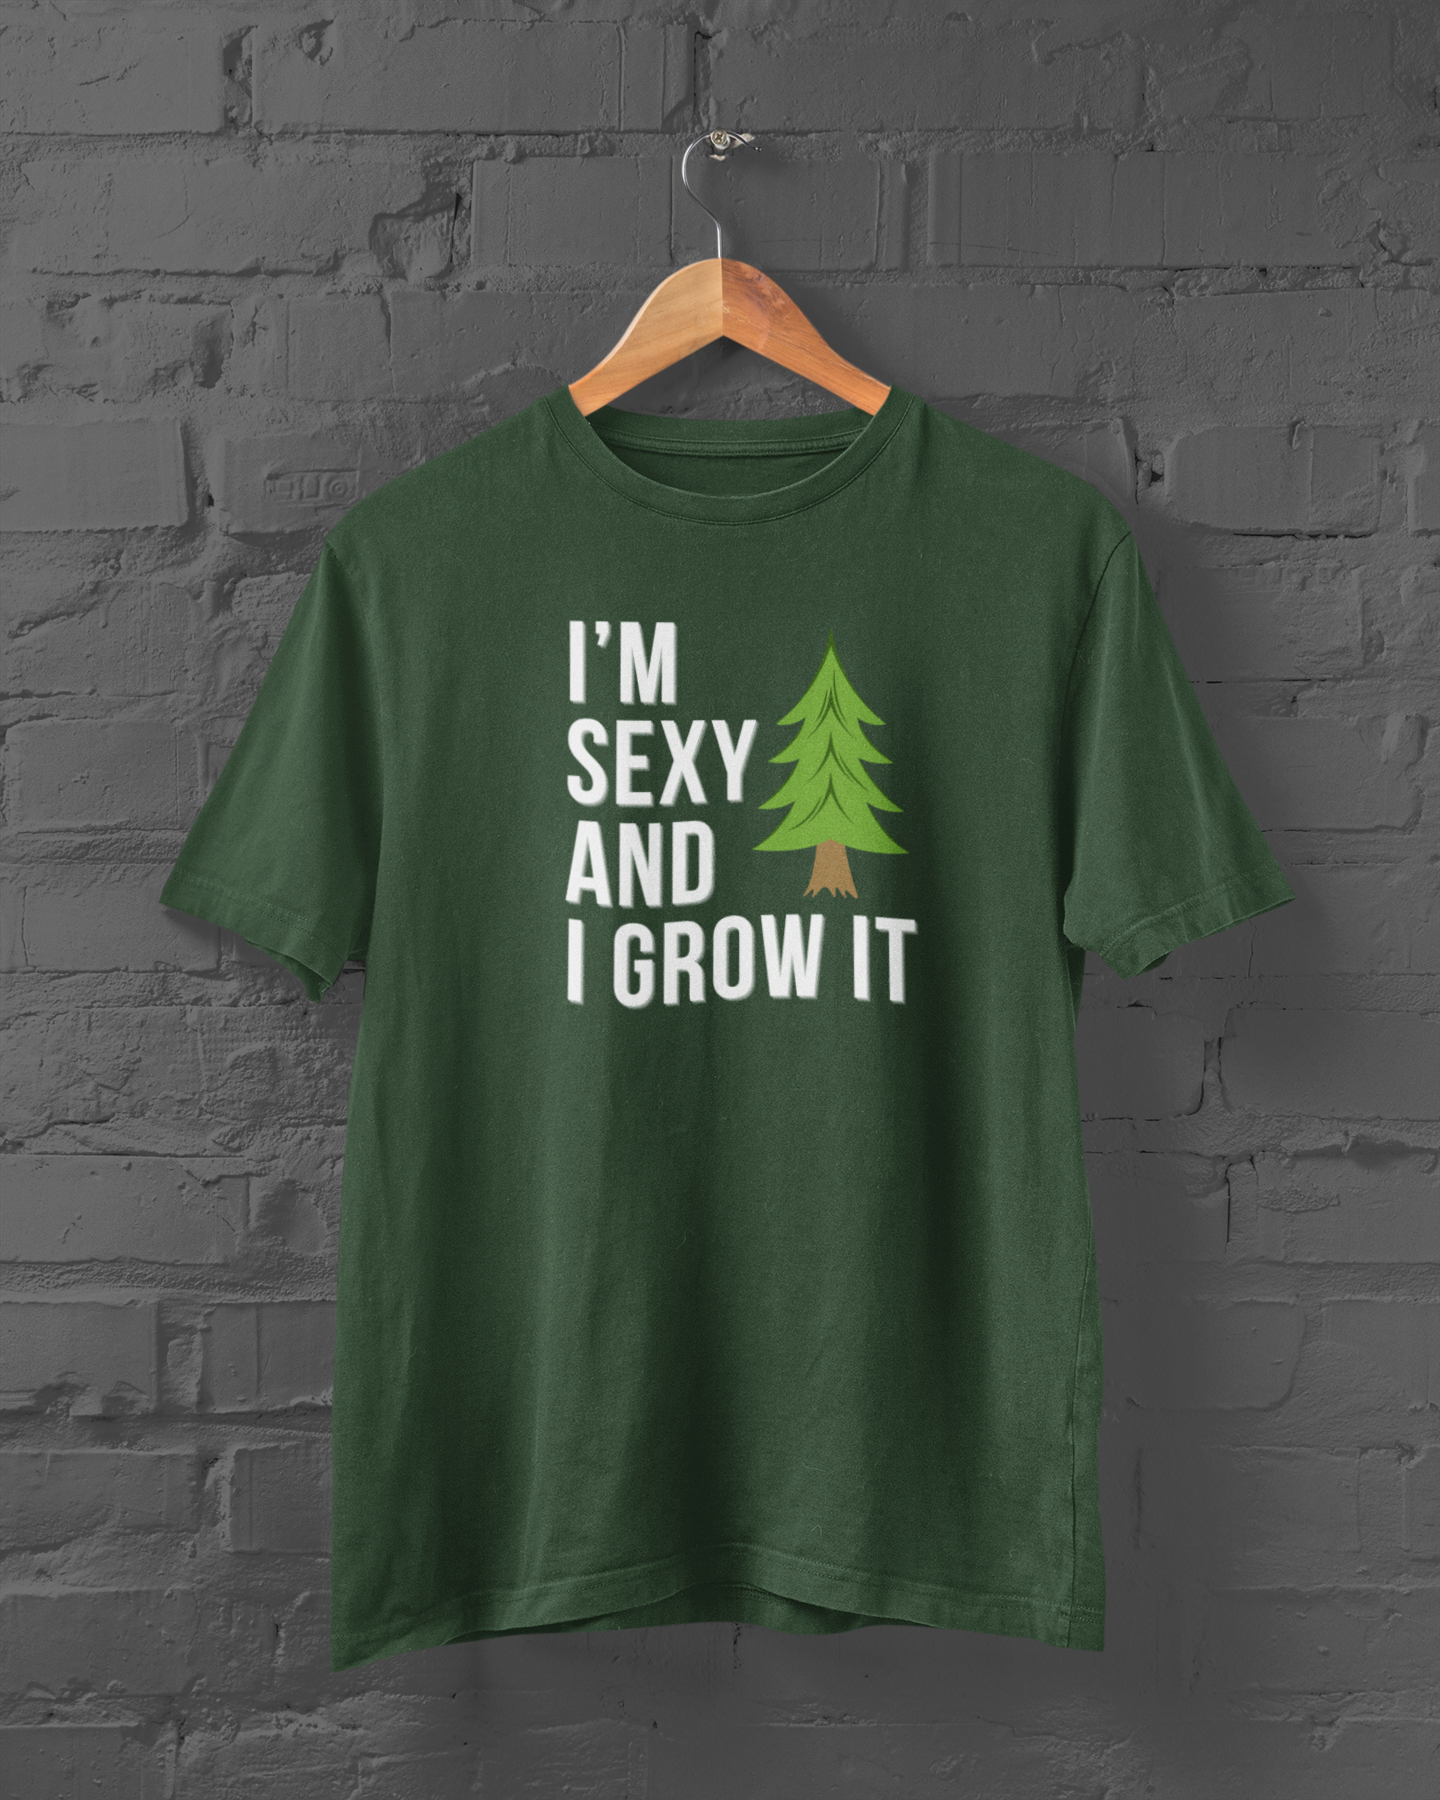 This t-shirt is everything you've dreamed and is the perfect shirt for anyone who loves to grow trees (and looks good doing it). Landscaper Apparel brings you this t-shirt featuring the words 